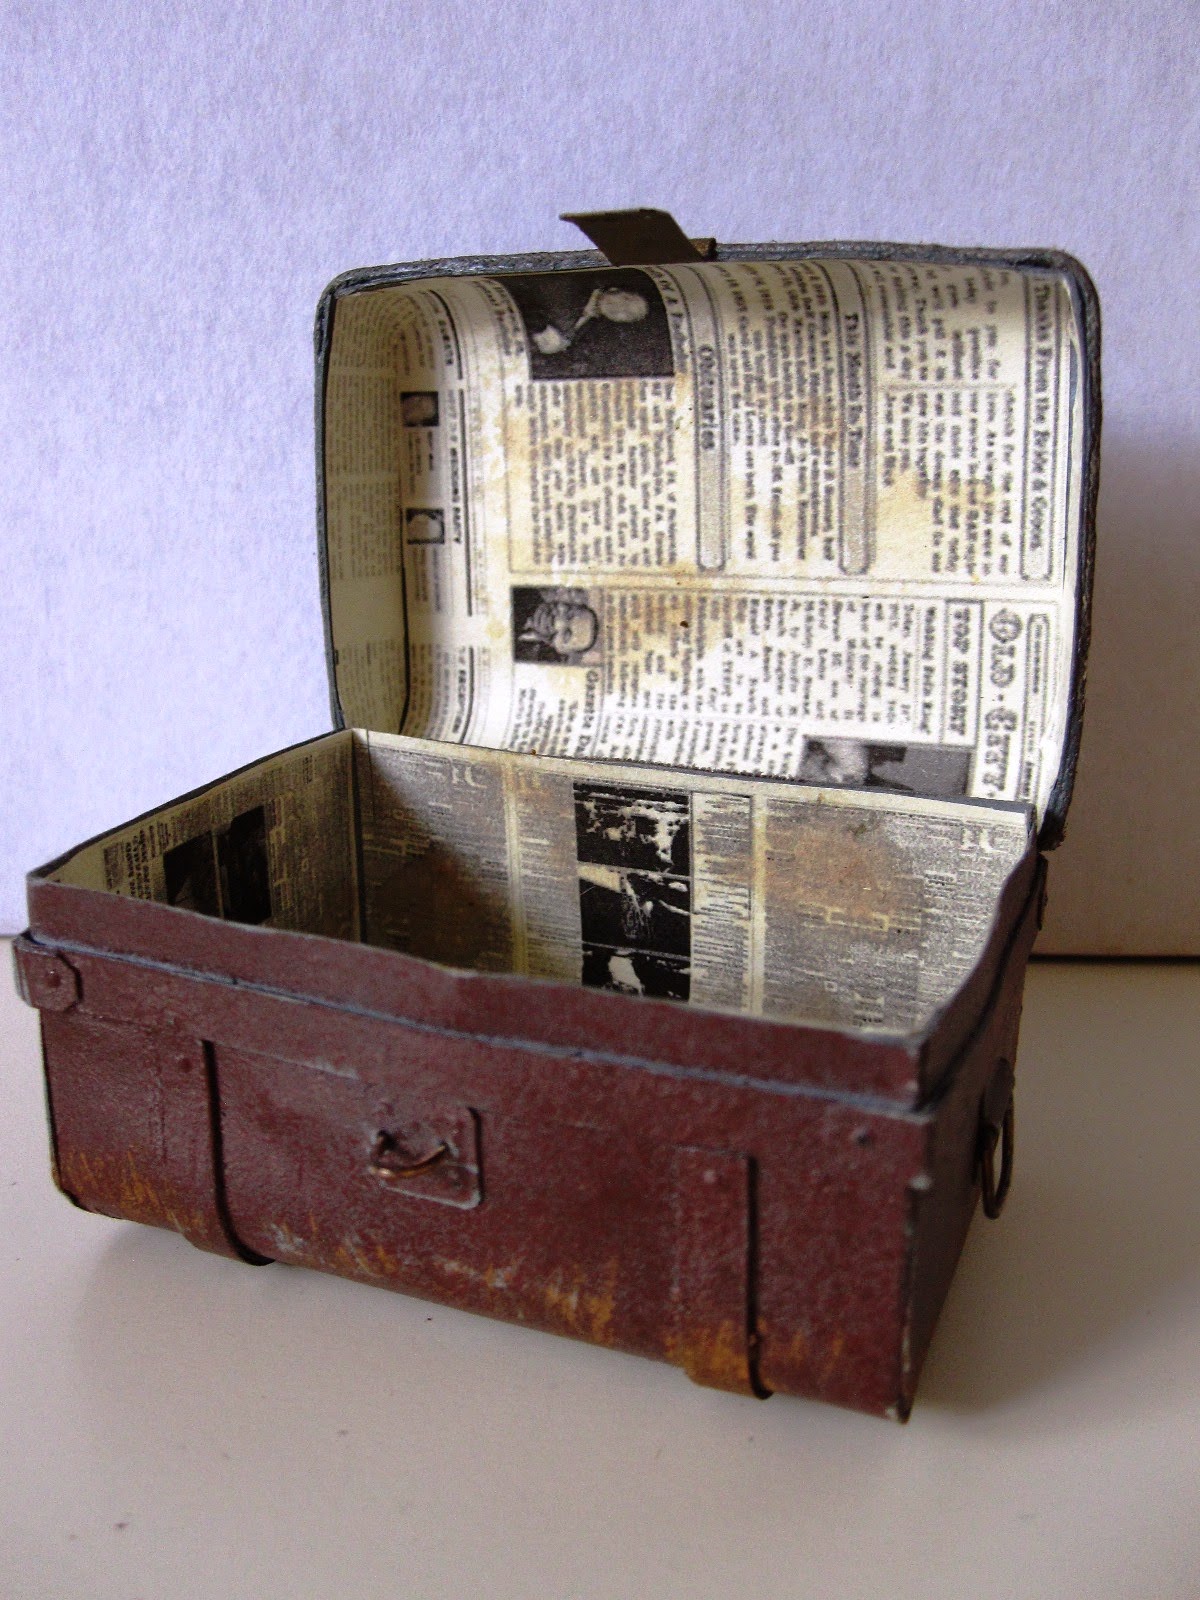 Open miniature vintage tin trunk, showing newspaper lining.